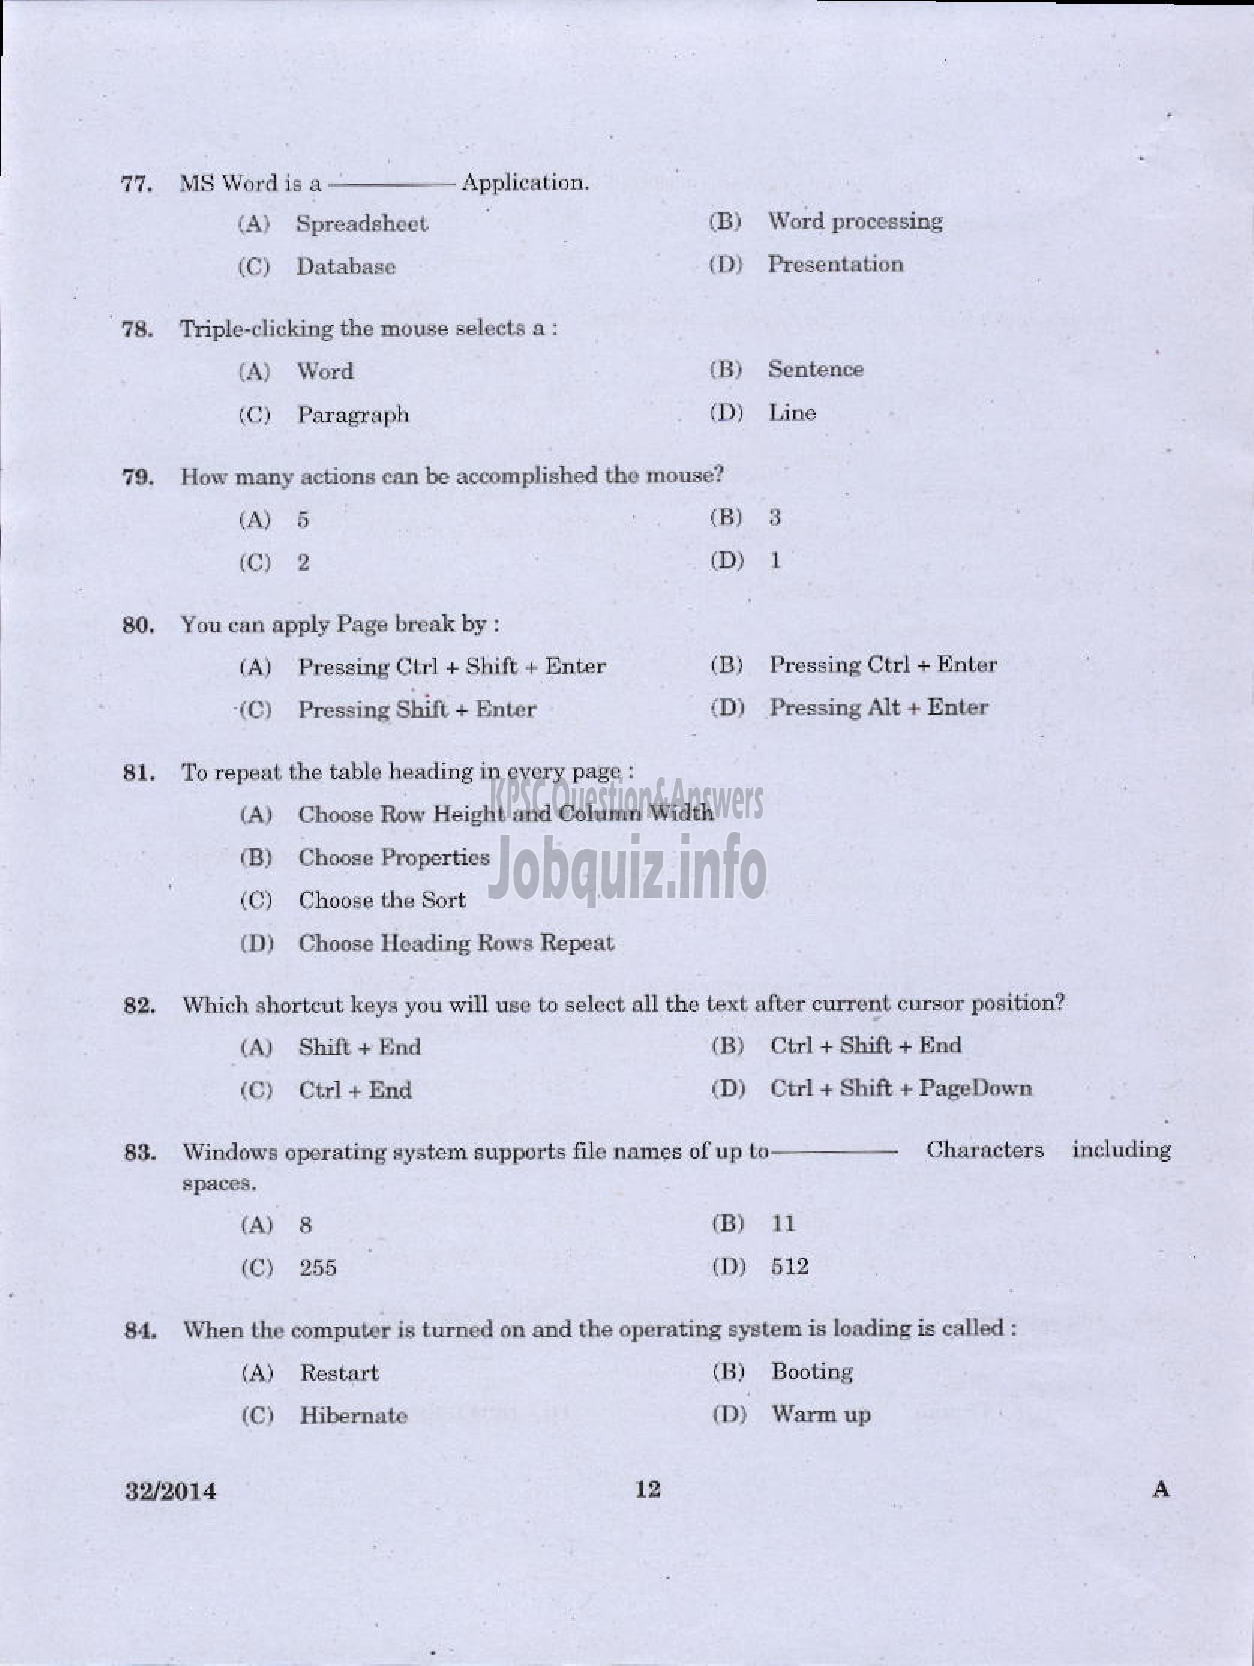 Kerala PSC Question Paper - LOWER DIVISION TYPIST NCA VARIOUS GOVERNMENT OWNED COMPANIES IDKY-10